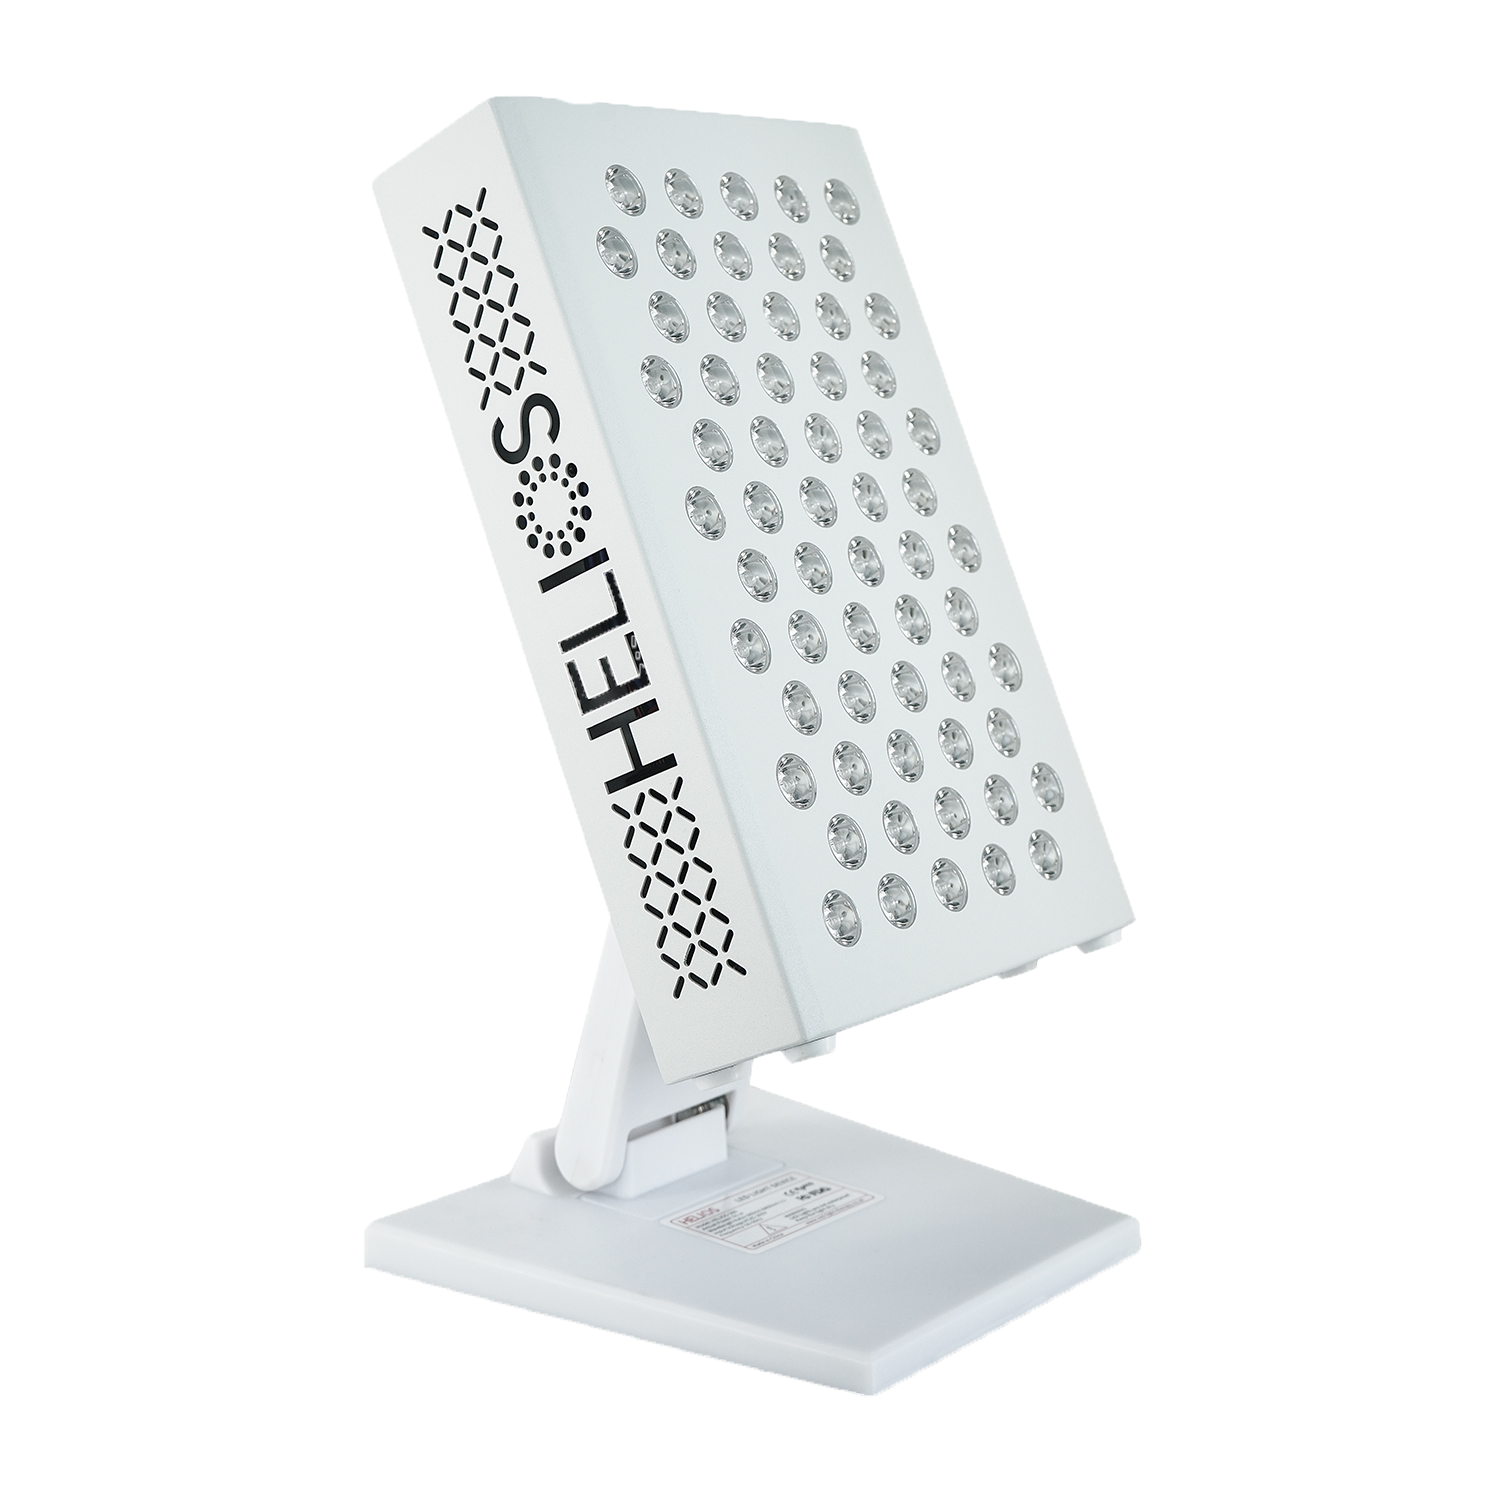 Helios 2 Series - 300w Targeted Red Light Therapy Device